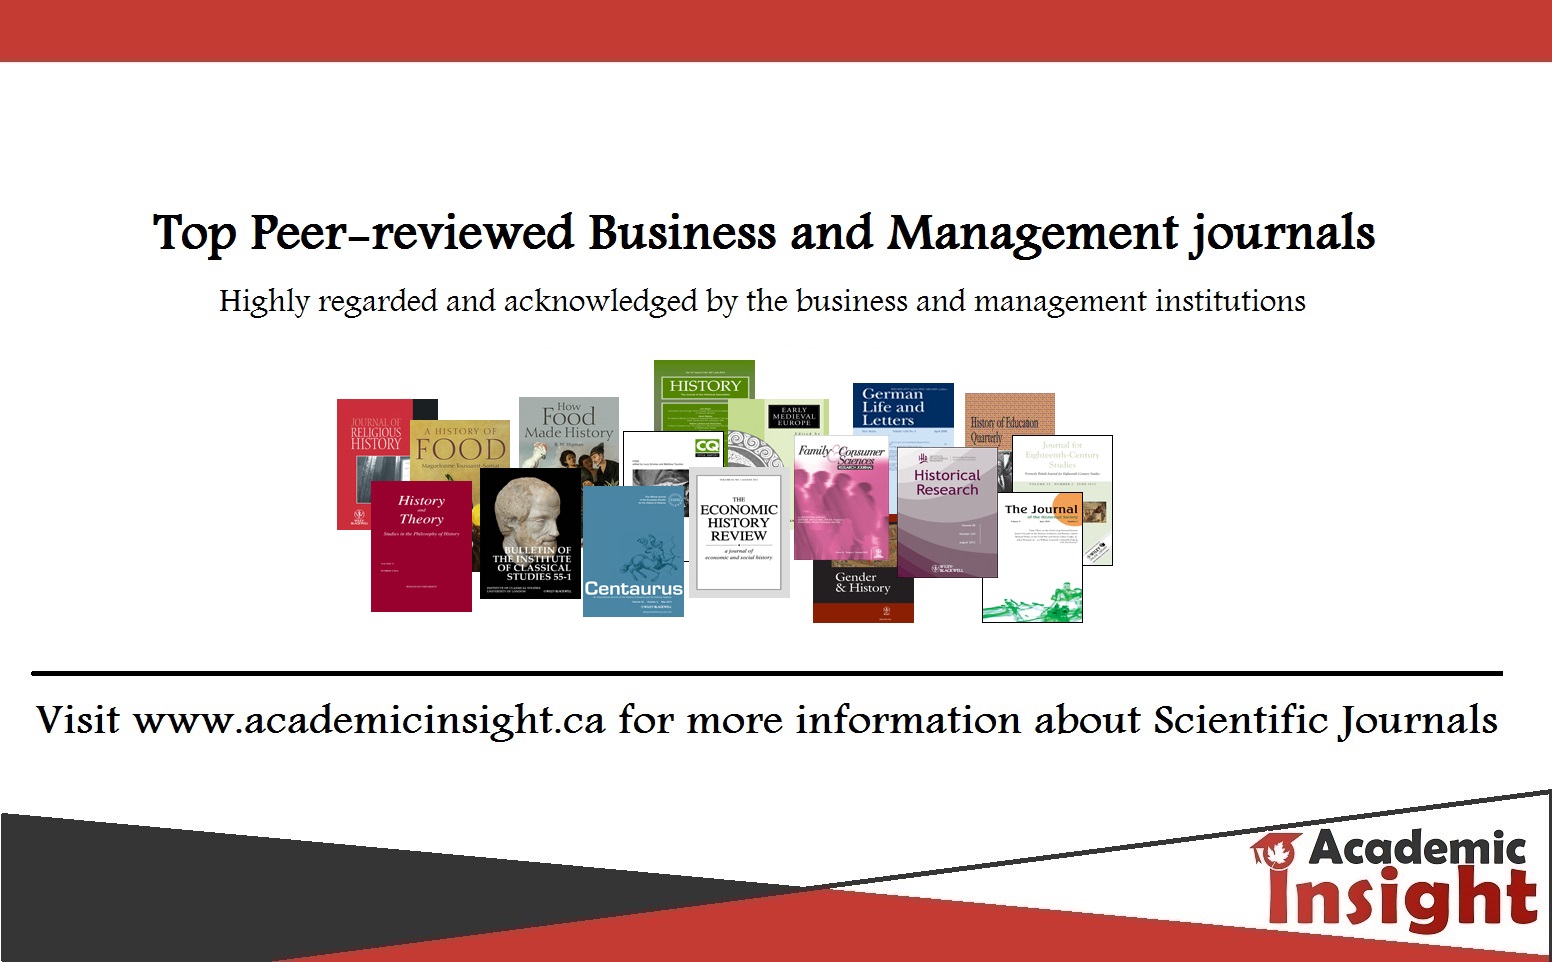 Business and Management journals